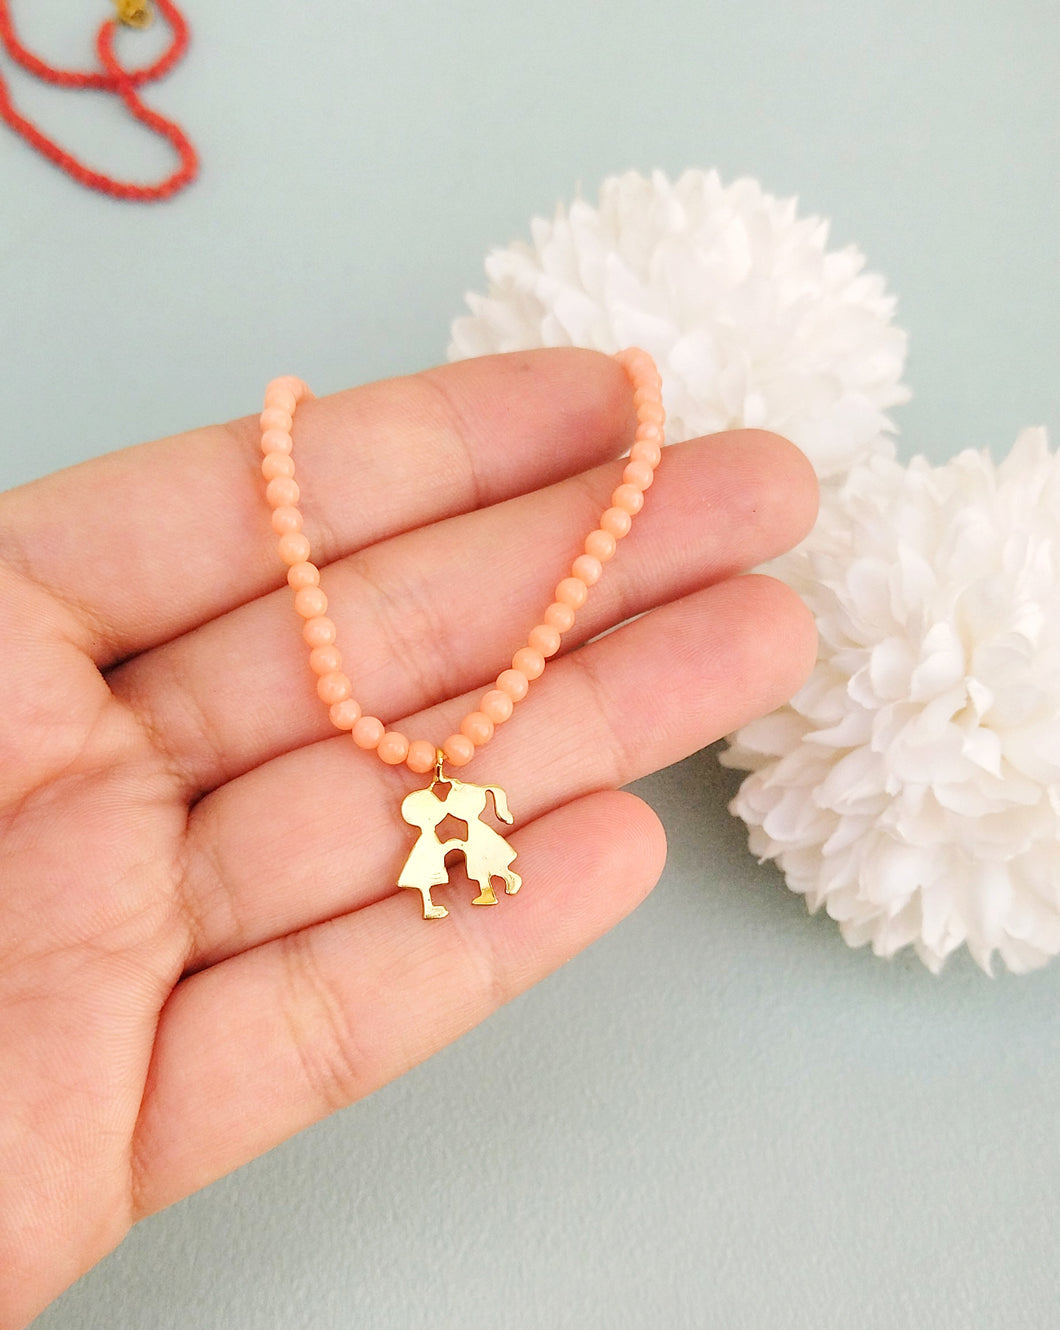 Beaded Gemstone Lovers Necklace, Cute 18k Gold Plated Silver Boy And Girl Charm In Tiny Beads Necklace